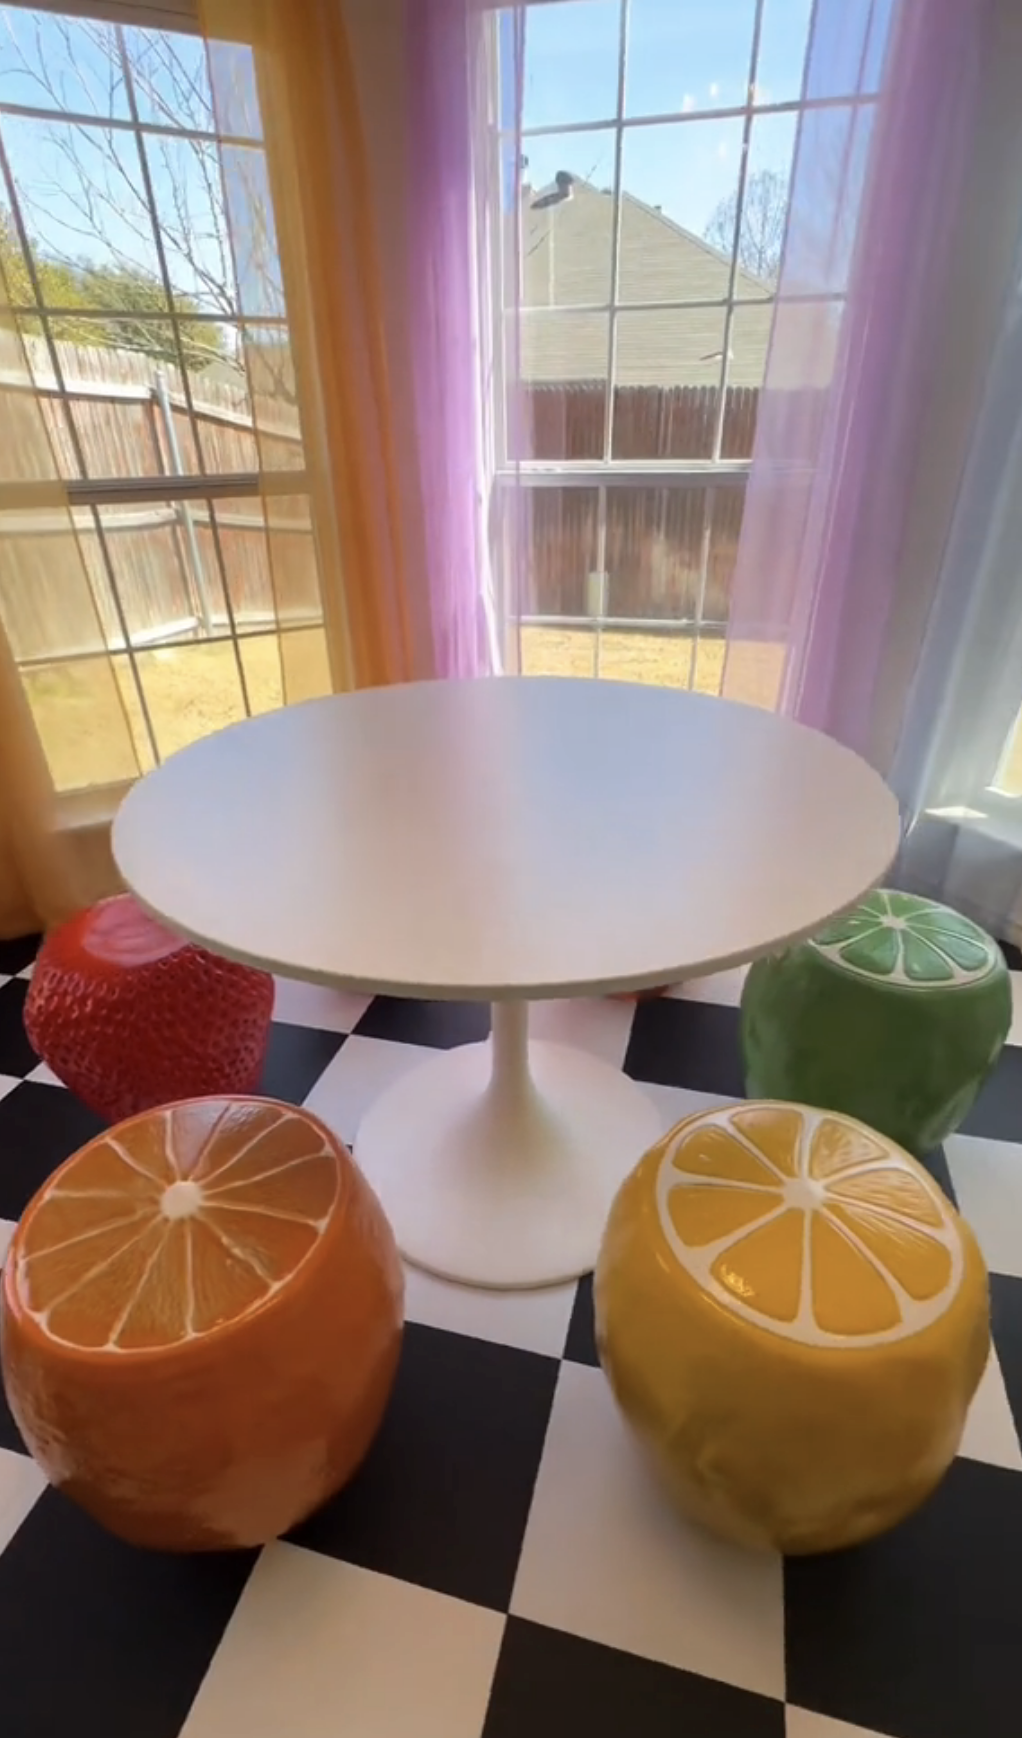 Table with fruit-shaped stool chairs on a checkered floor by a window with purple curtains